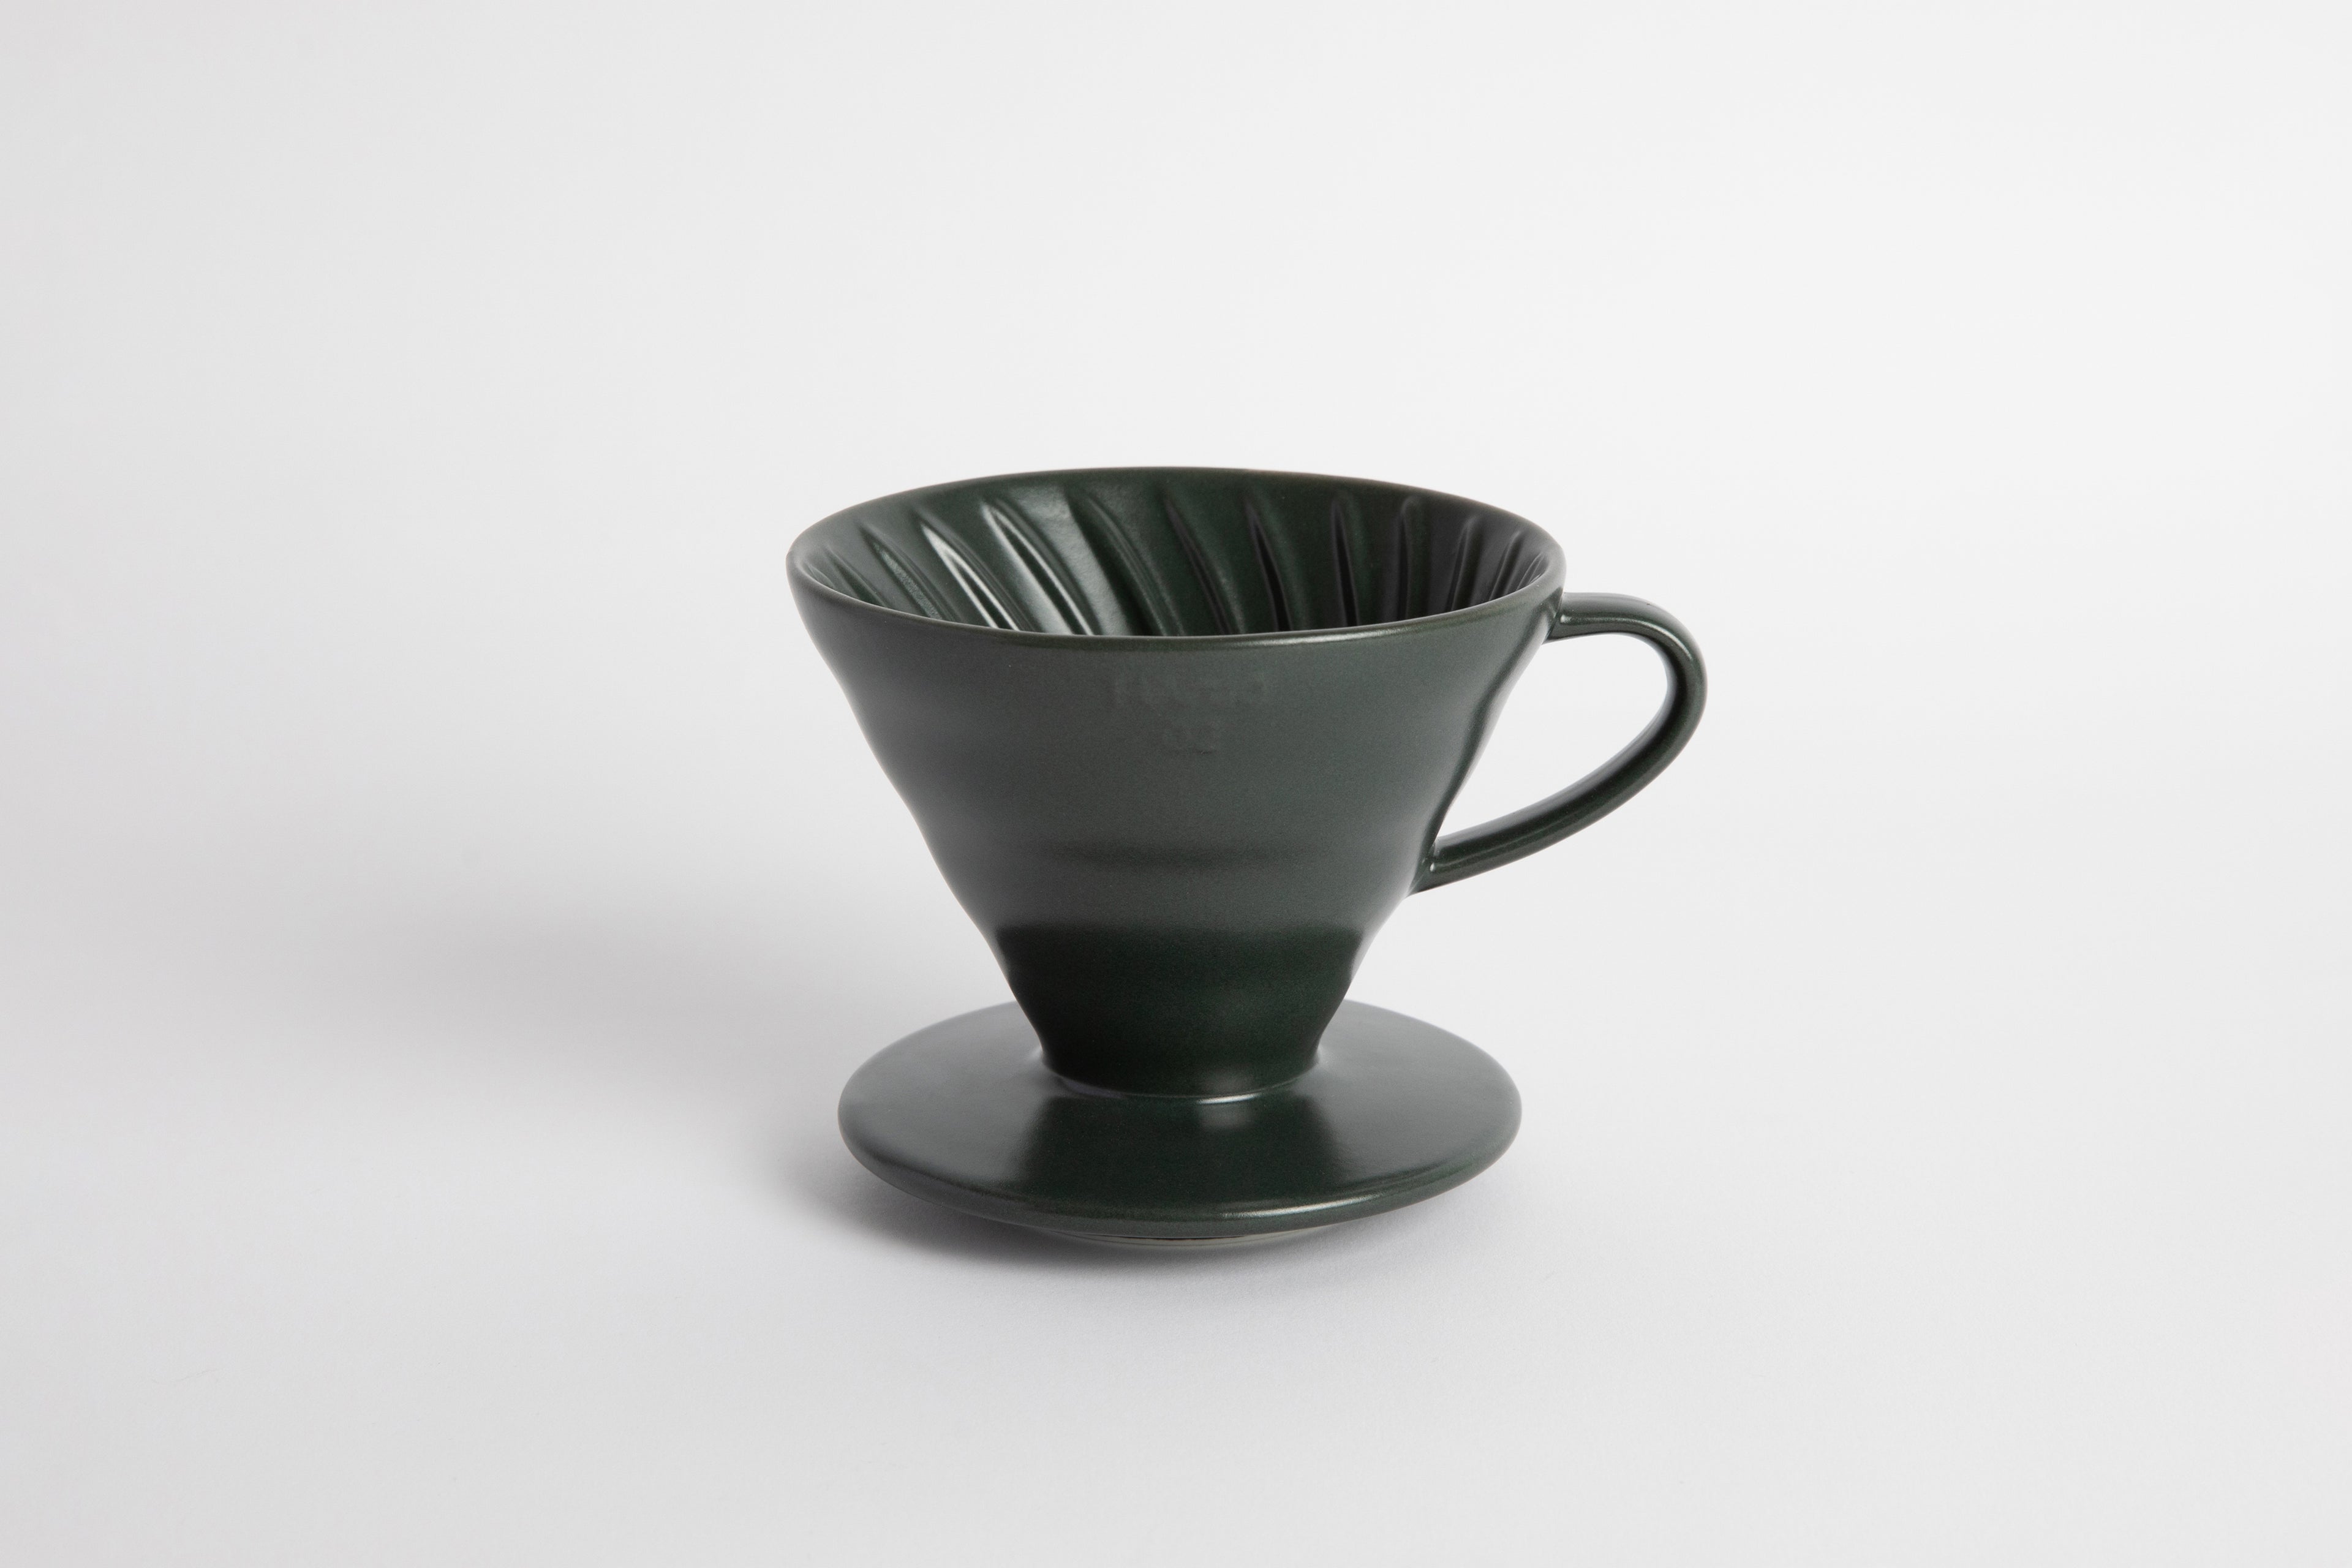 Dark Green colored 60 degree cone shaped ceramic coffee dripper with handle and round base. Spiral ribbed on the inside cone. Set on white background